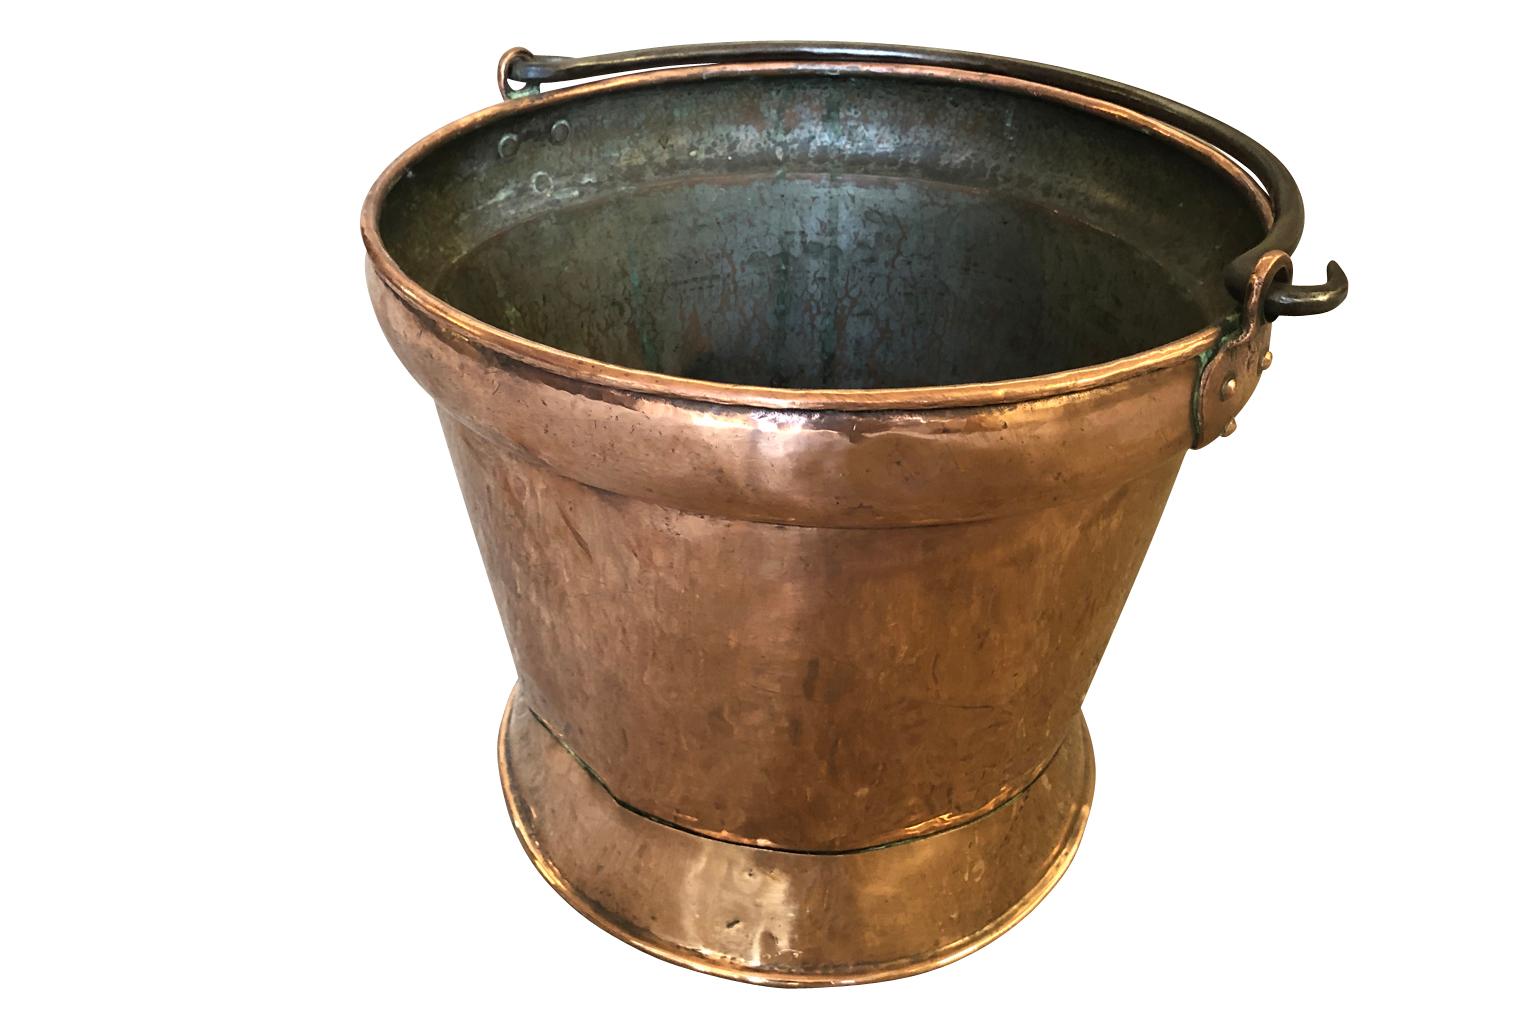 A very charming French 18th century copper bucket from the South of France. A perfect kitchen island accent piece.